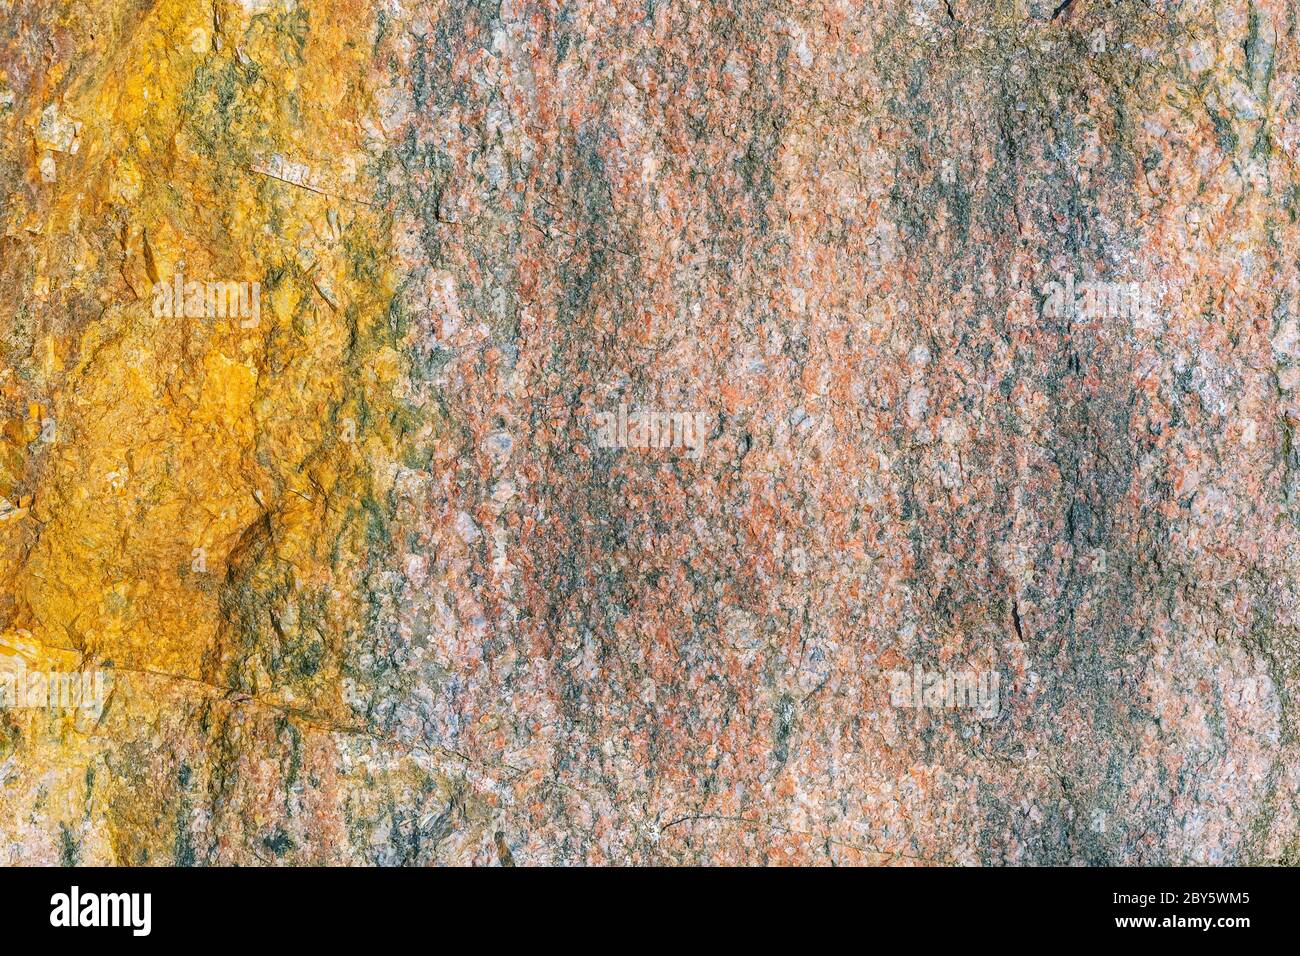 Fragment of the rough surface of a flat stone. For use as an abstract background. Stock Photo